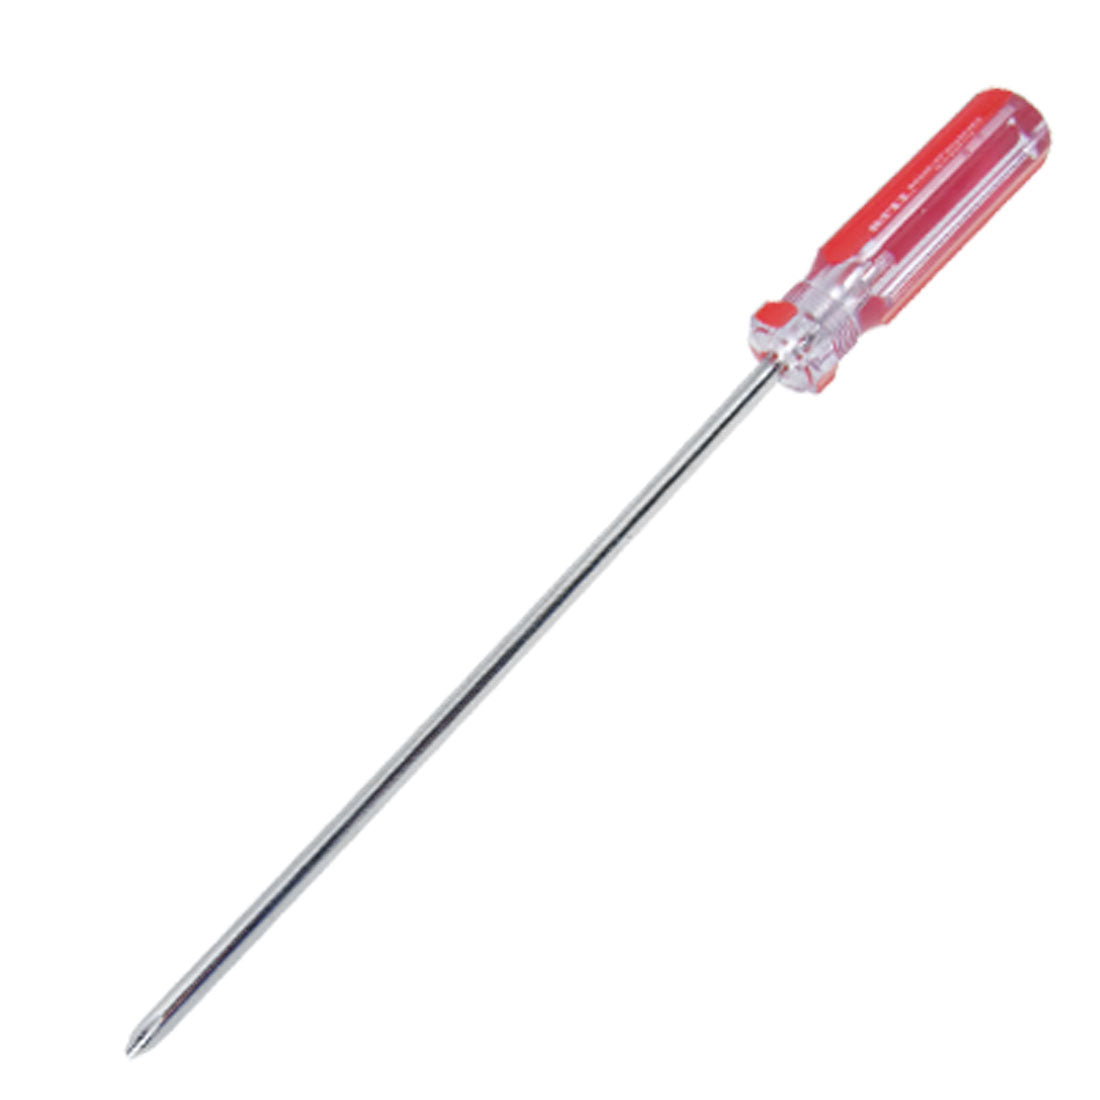 Uxcell Uxcell 6mm Magnetic Phillips Tip Screwdriver Hand Tool 200mm Long